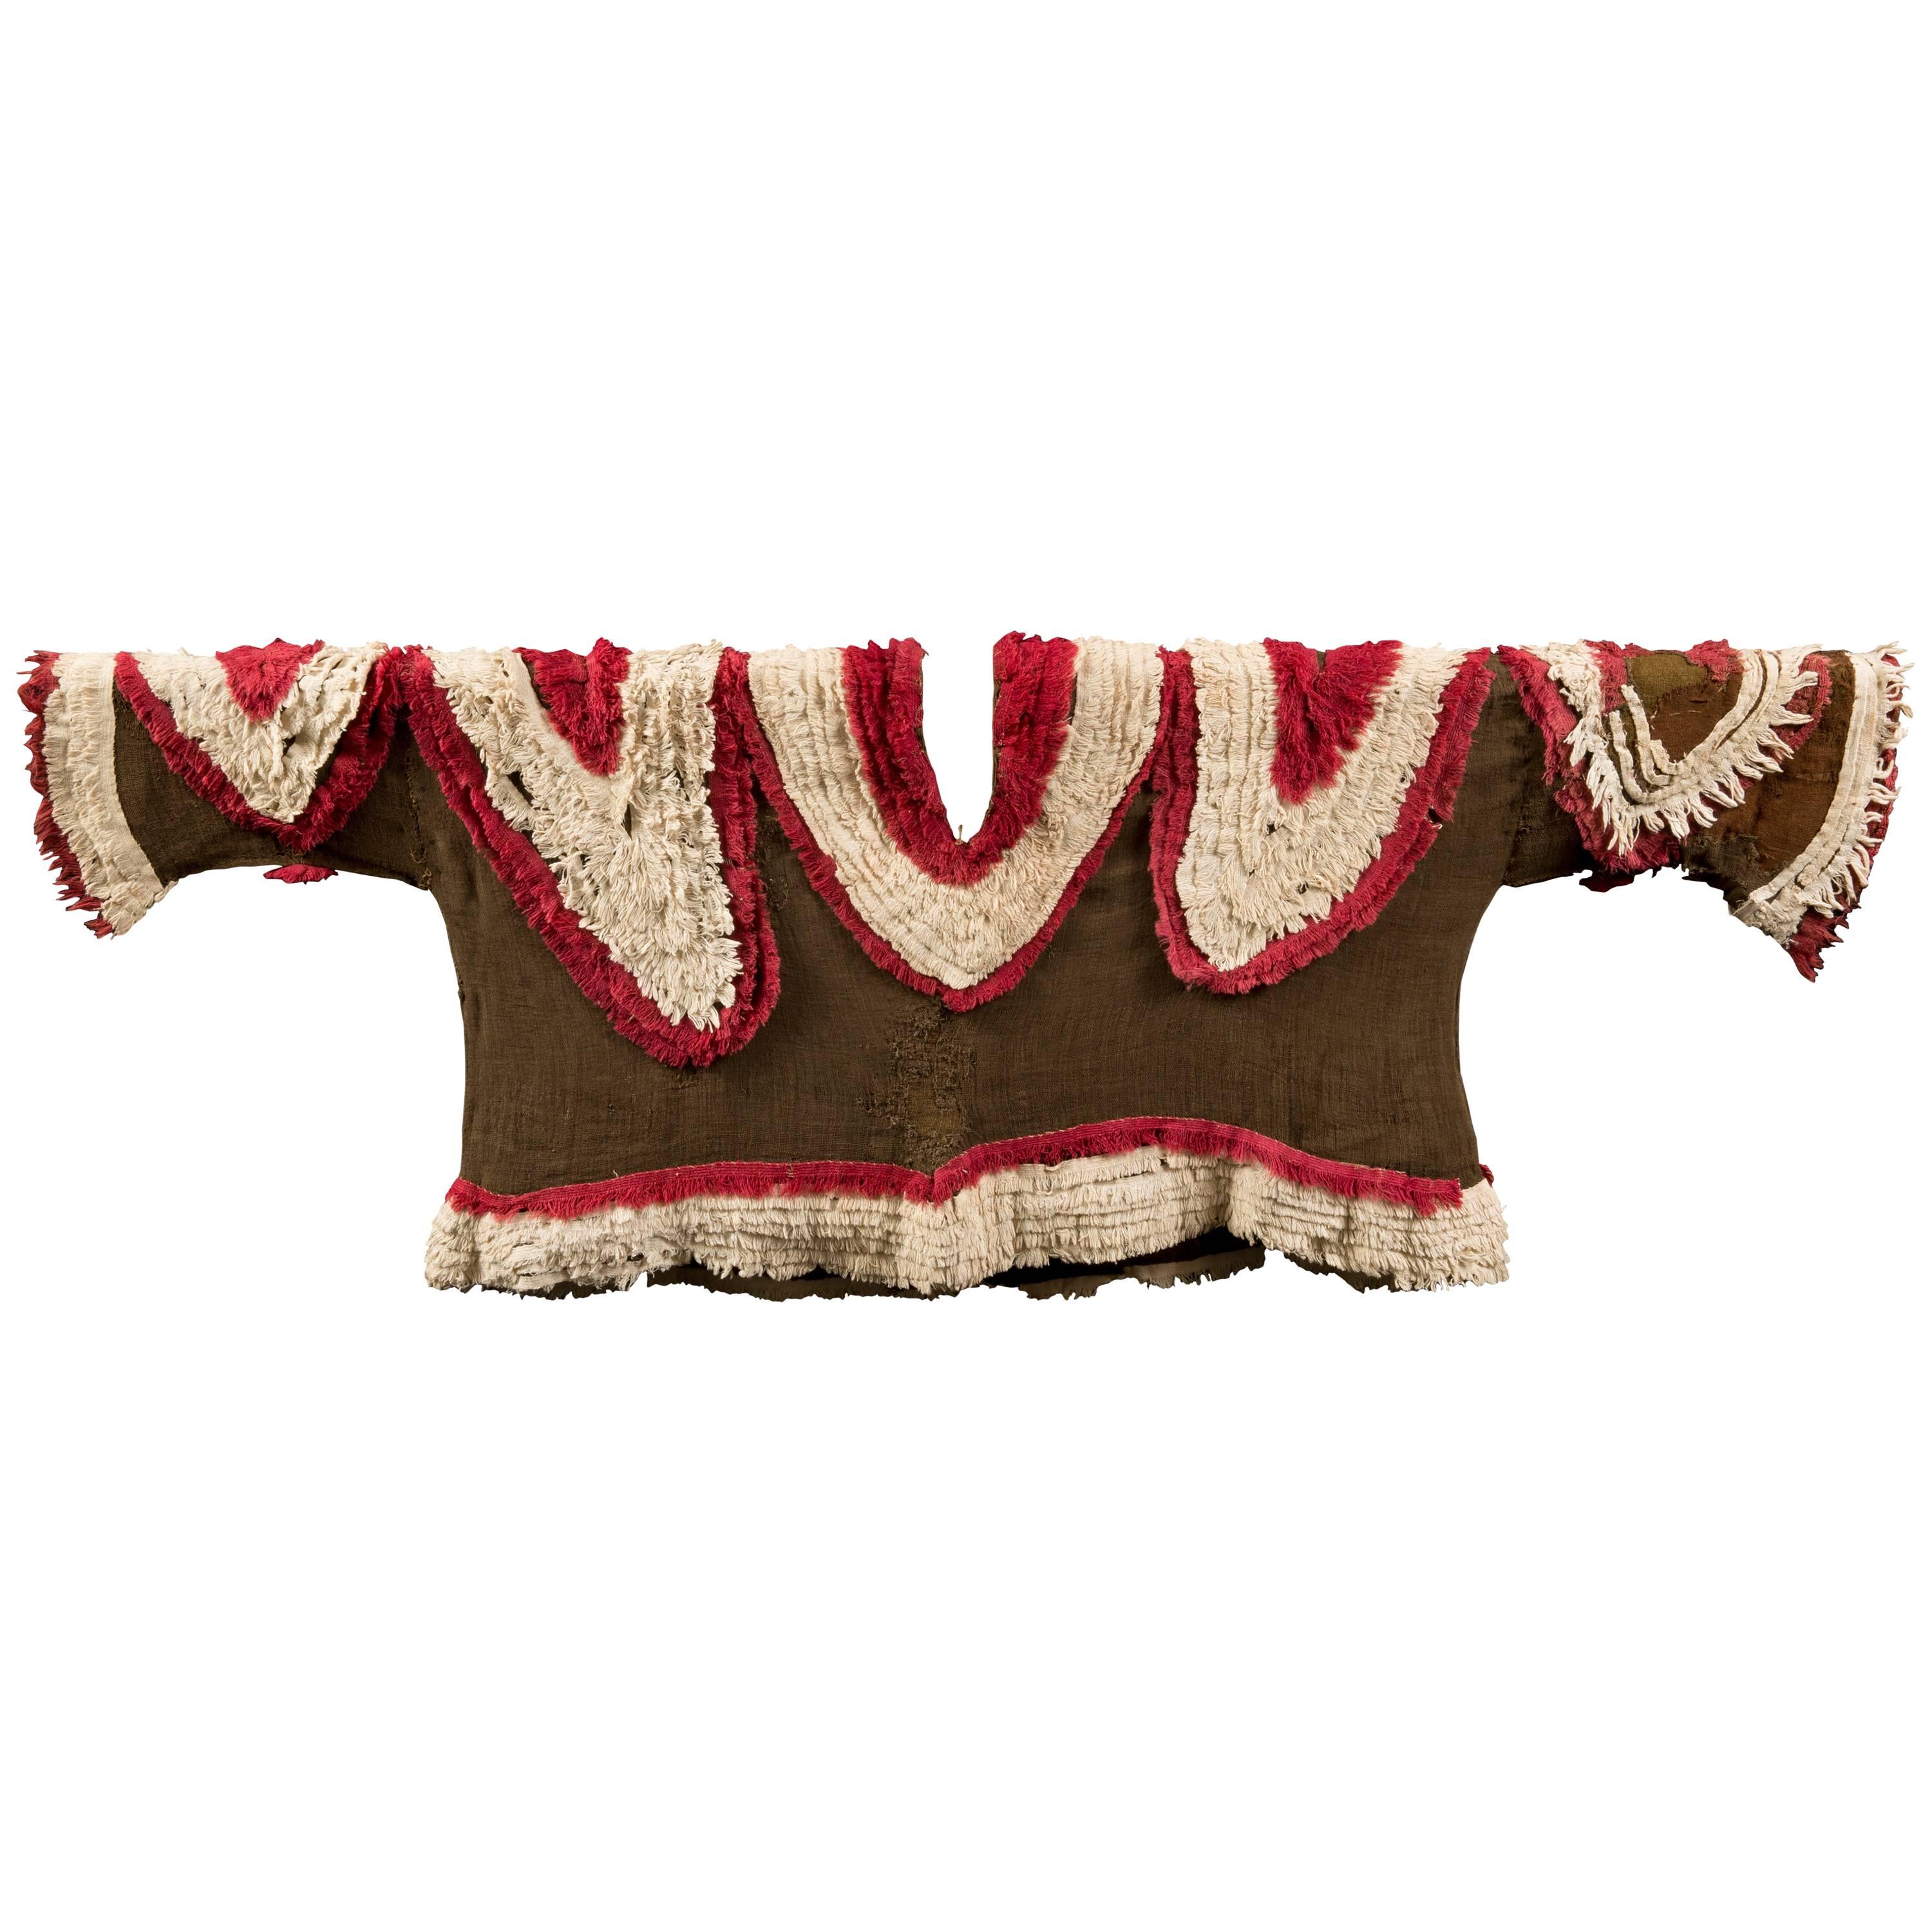 Extremely Rare Pre-Columbian Chimu Gauze Poncho Textile, Peru, 1000-1450 AD For Sale